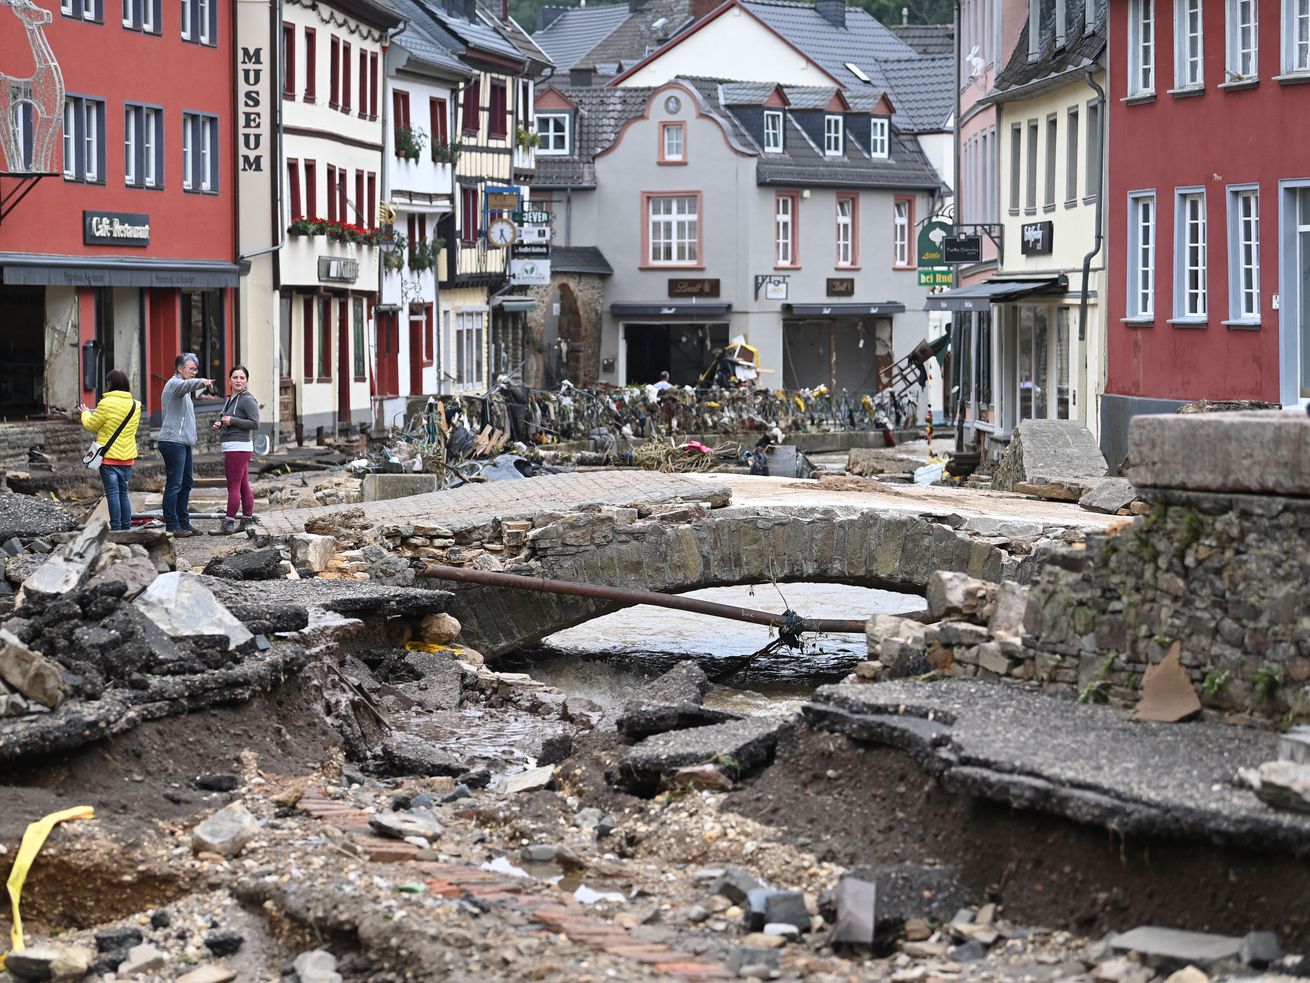 How climate change fueled the devastating floods in Germany and northwest Europe